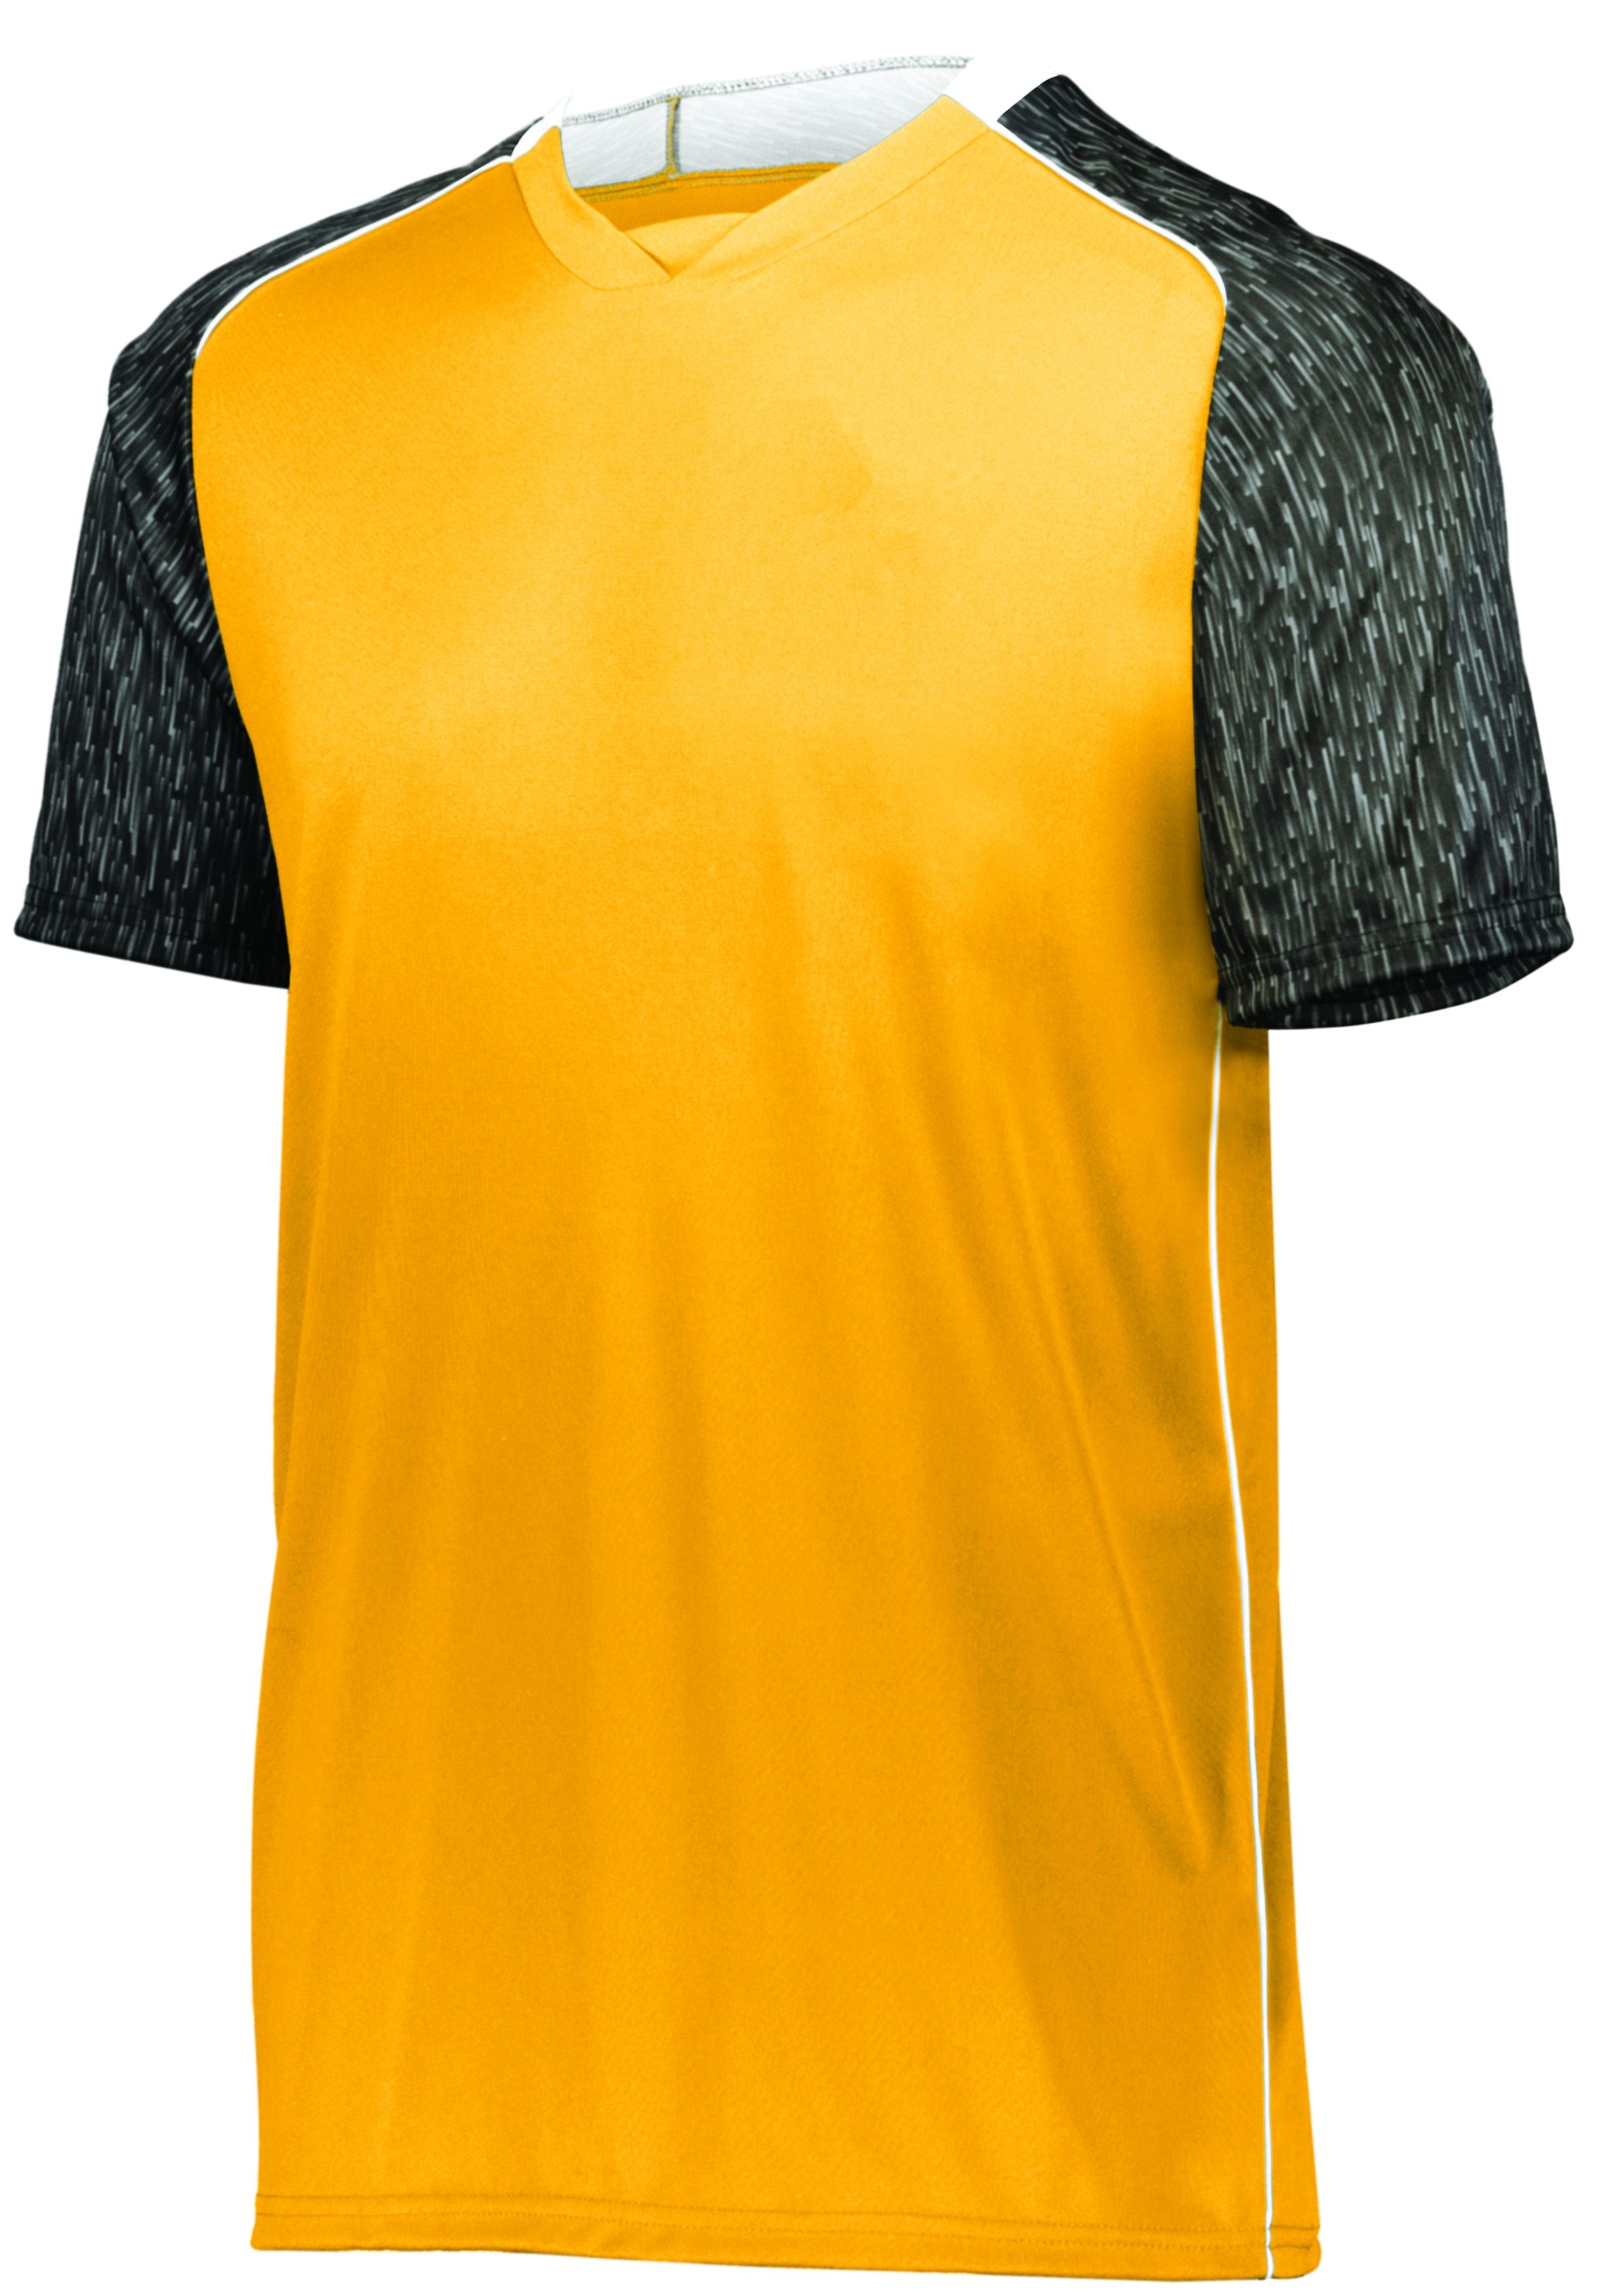 Youth Hawthorn Soccer Jersey 322941